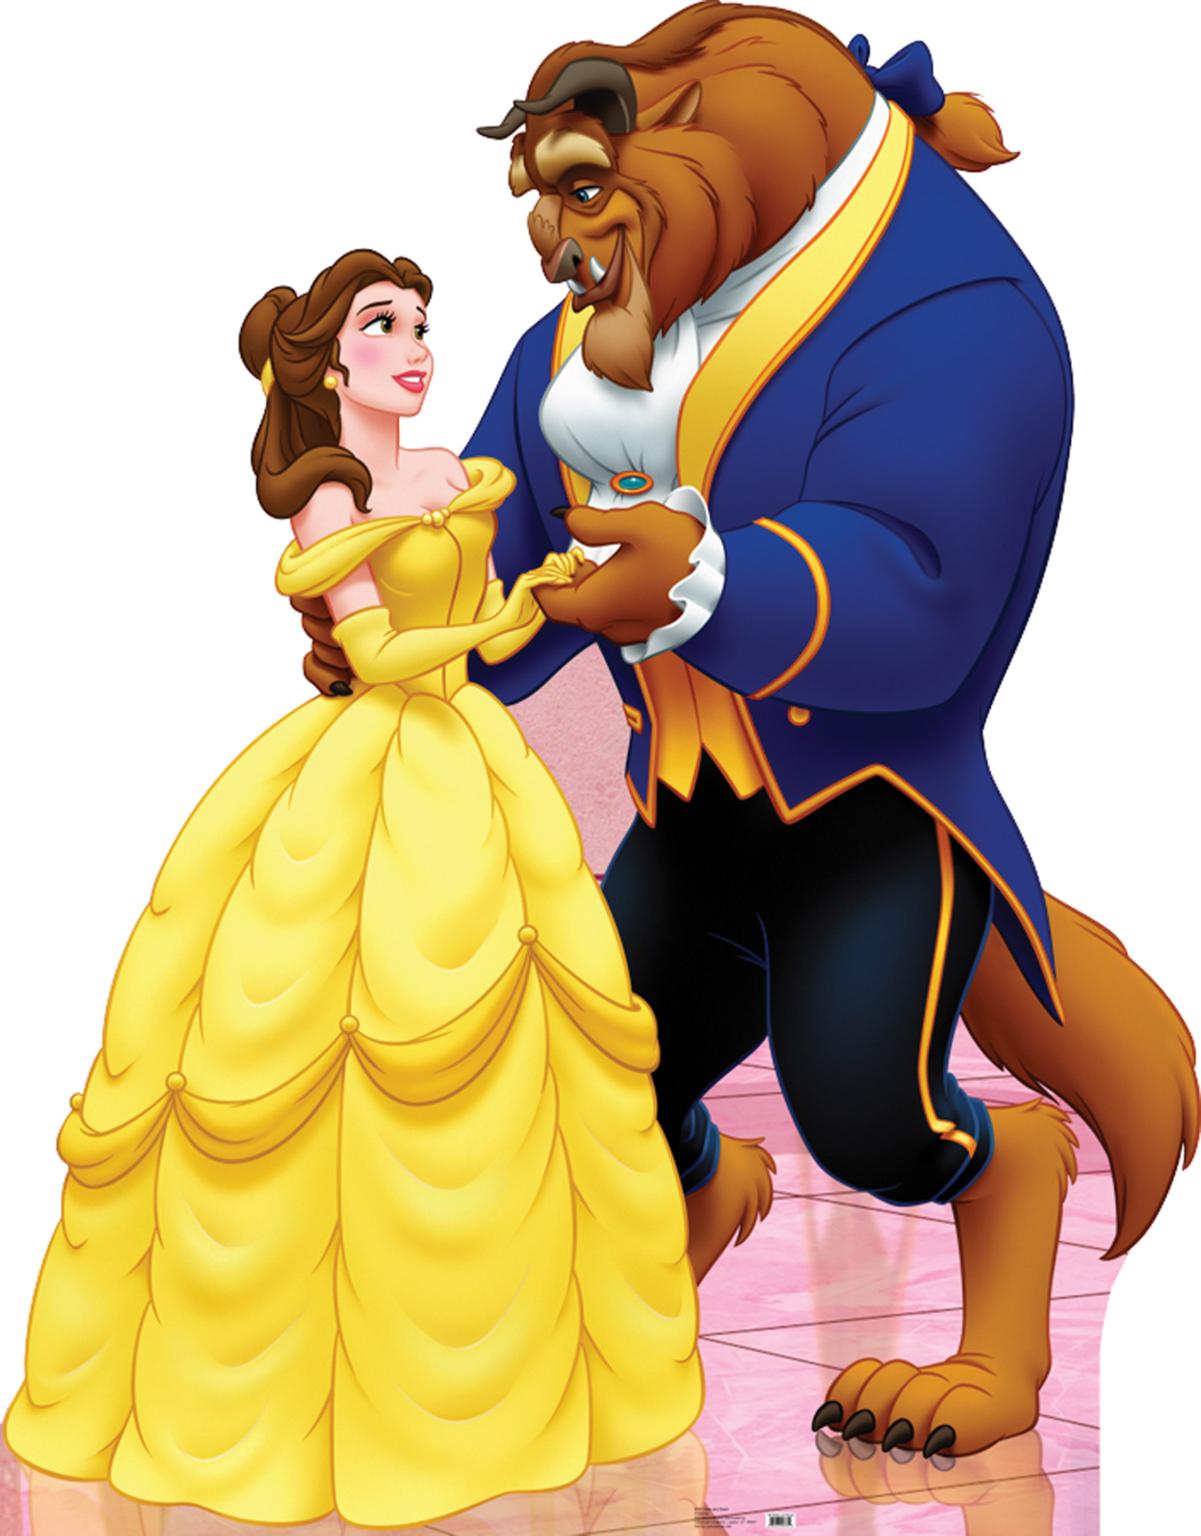 Beauty and the Beast Wallpapers High Quality | Download Free